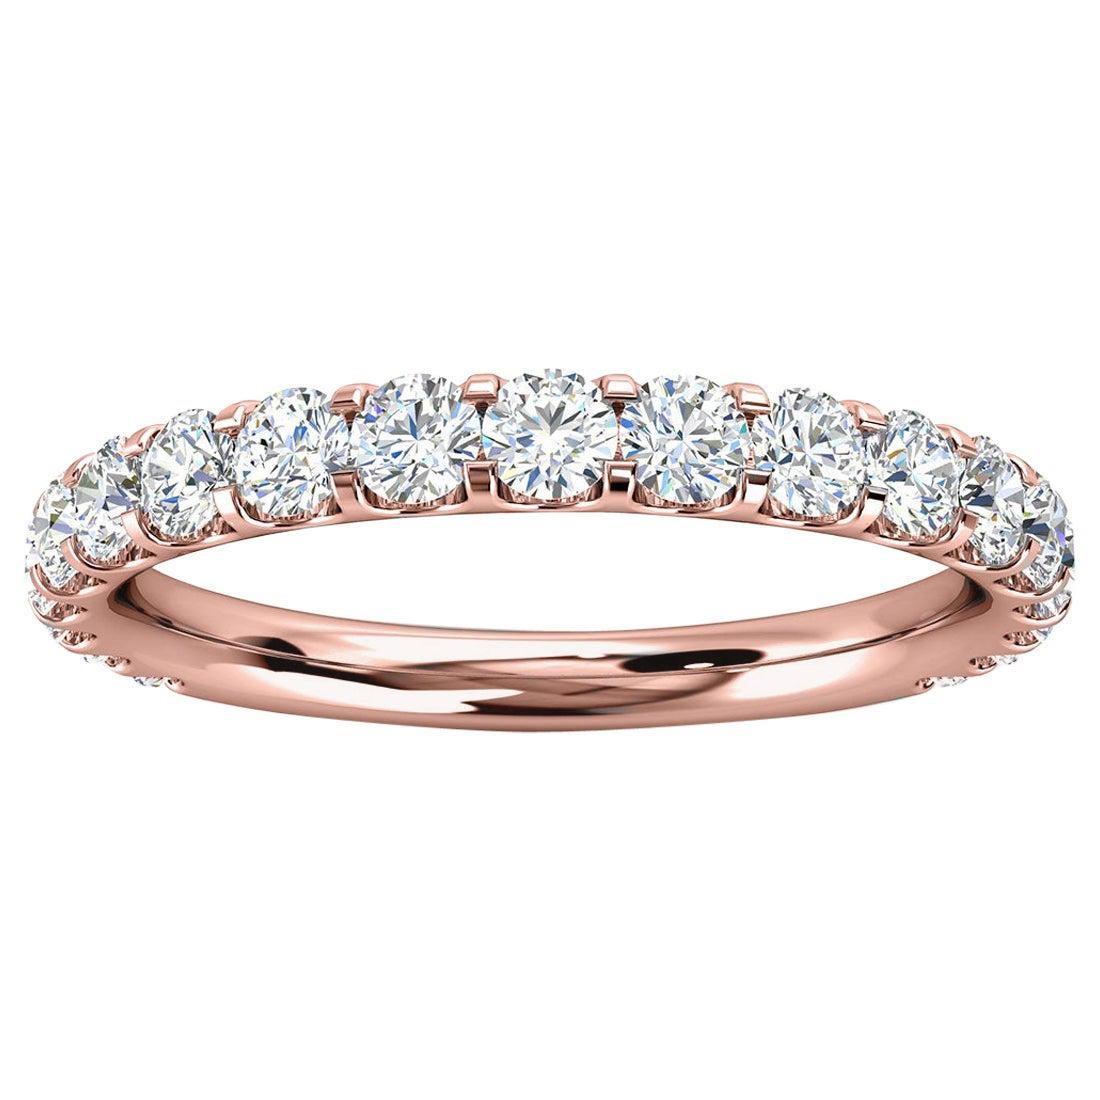 For Sale:  18K Rose Gold Carole Micro-Prong Diamond Ring '3/4 Ct. Tw'